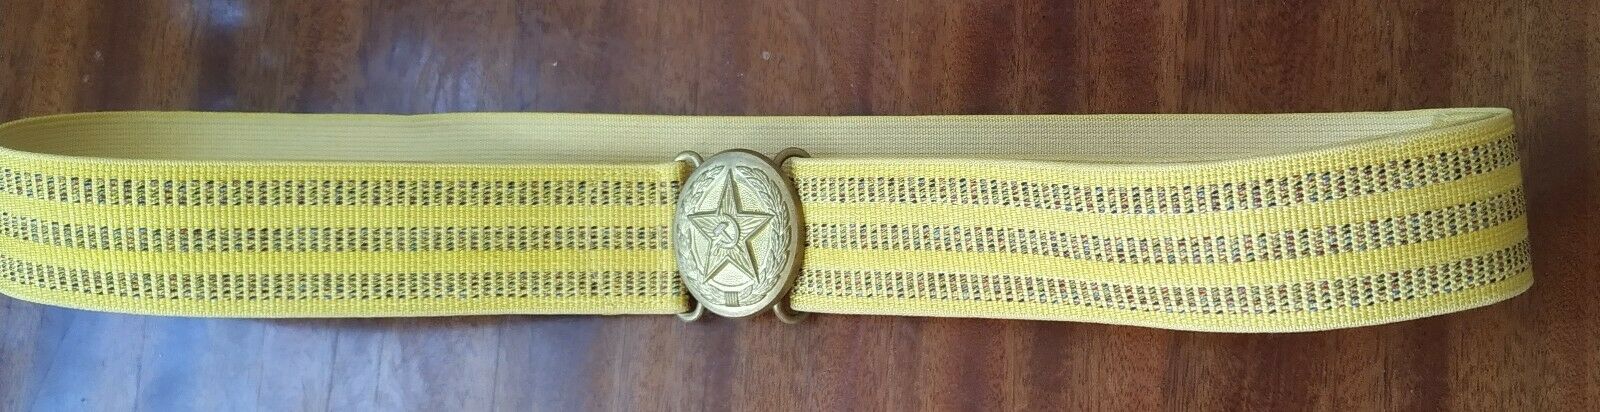 Ussr Army Belt 112cm Russian Military Soldier Uniform Parade Officer